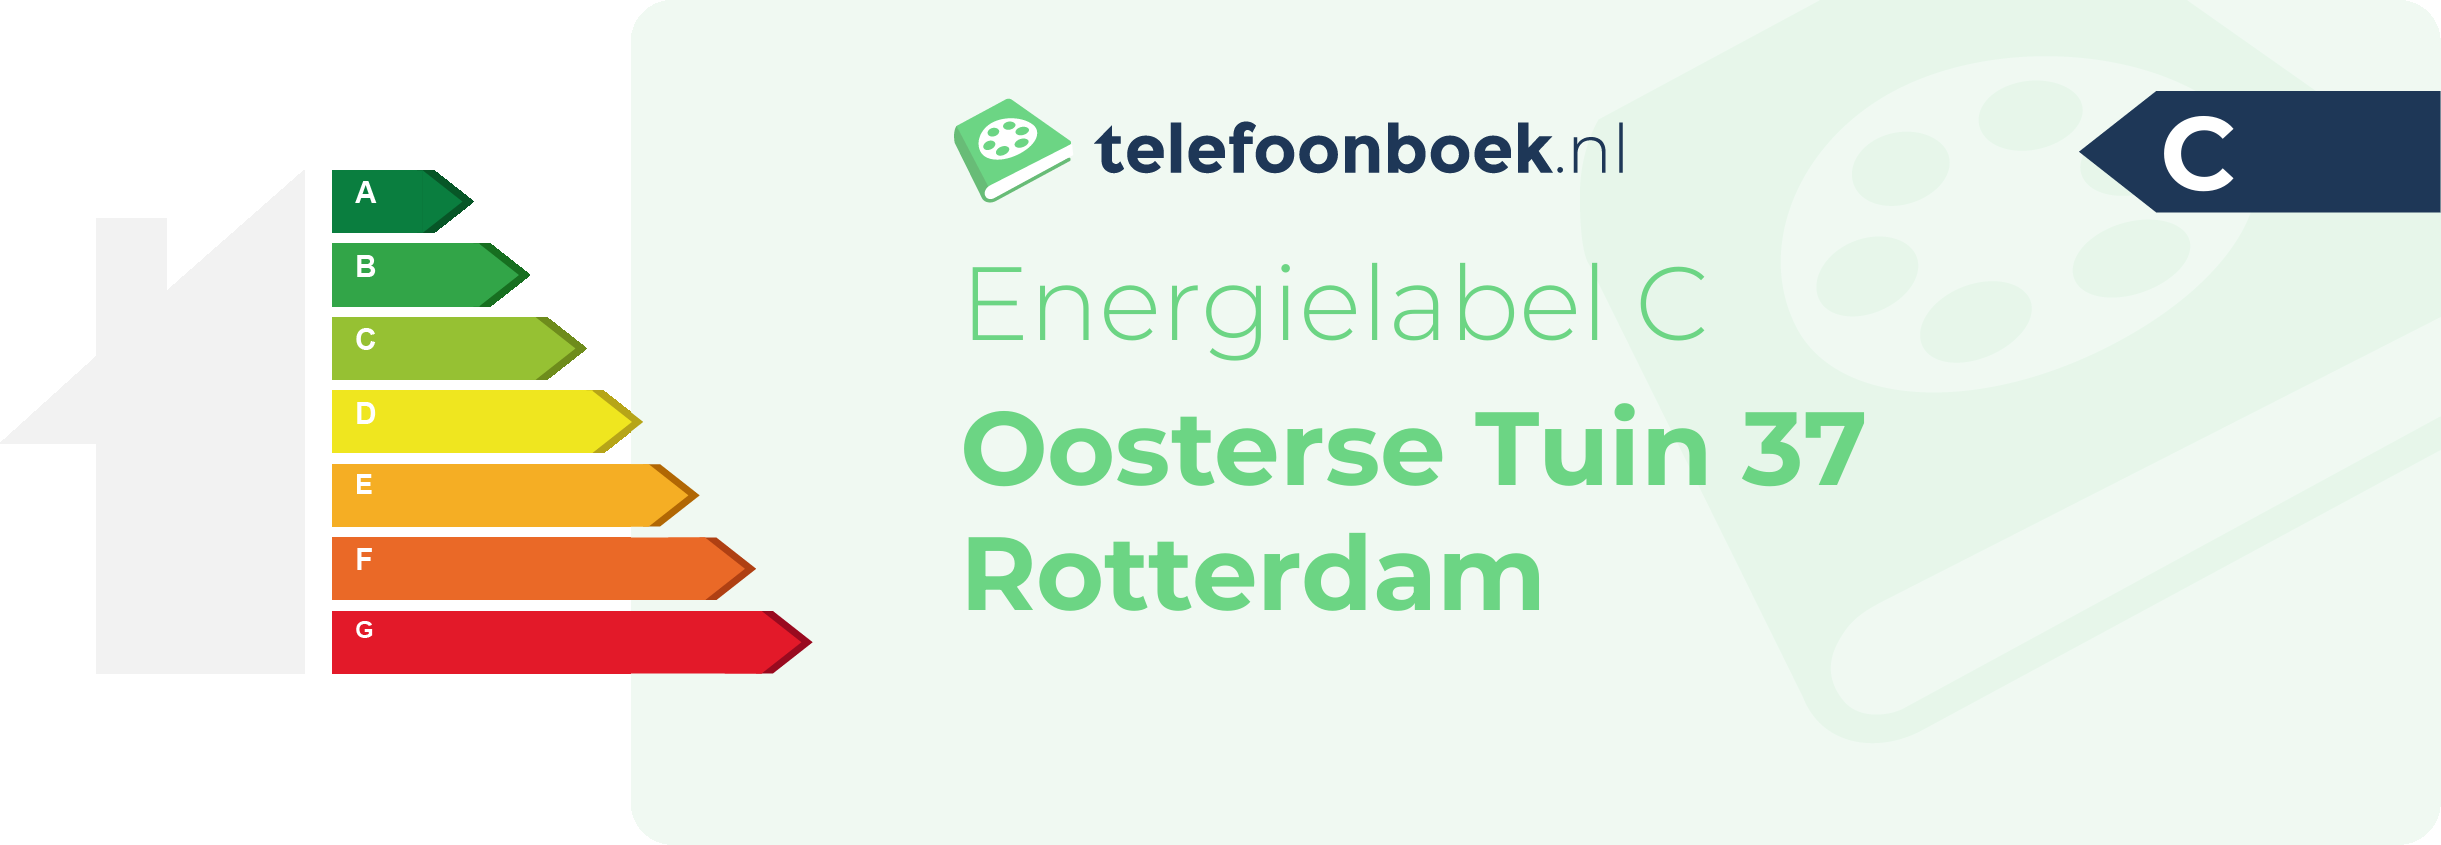 Energielabel Oosterse Tuin 37 Rotterdam